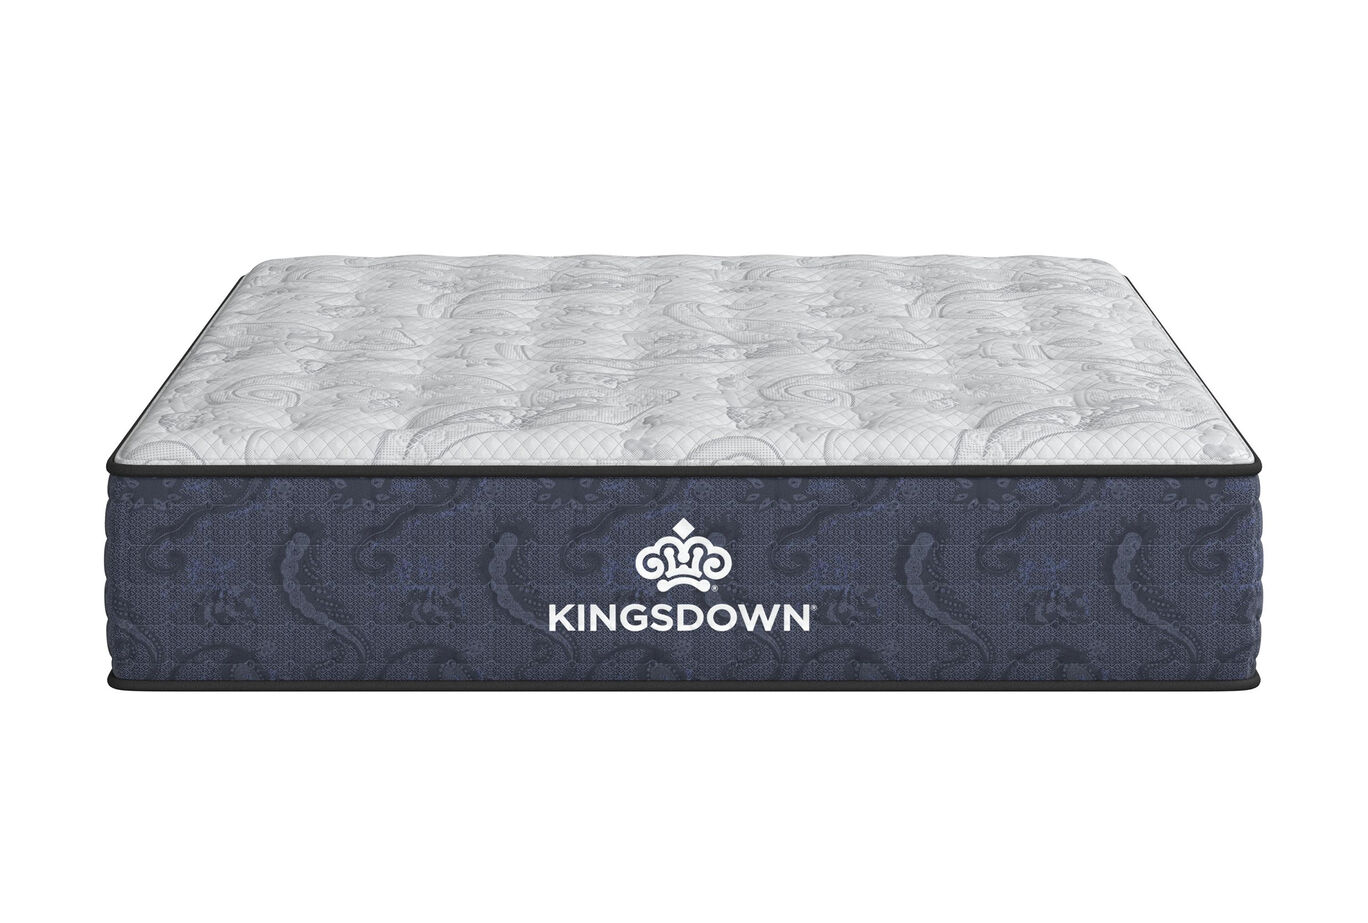 Kingsdown Vintage Sycamore Grove Firm Tight Top Mattress 13.5" image number 5